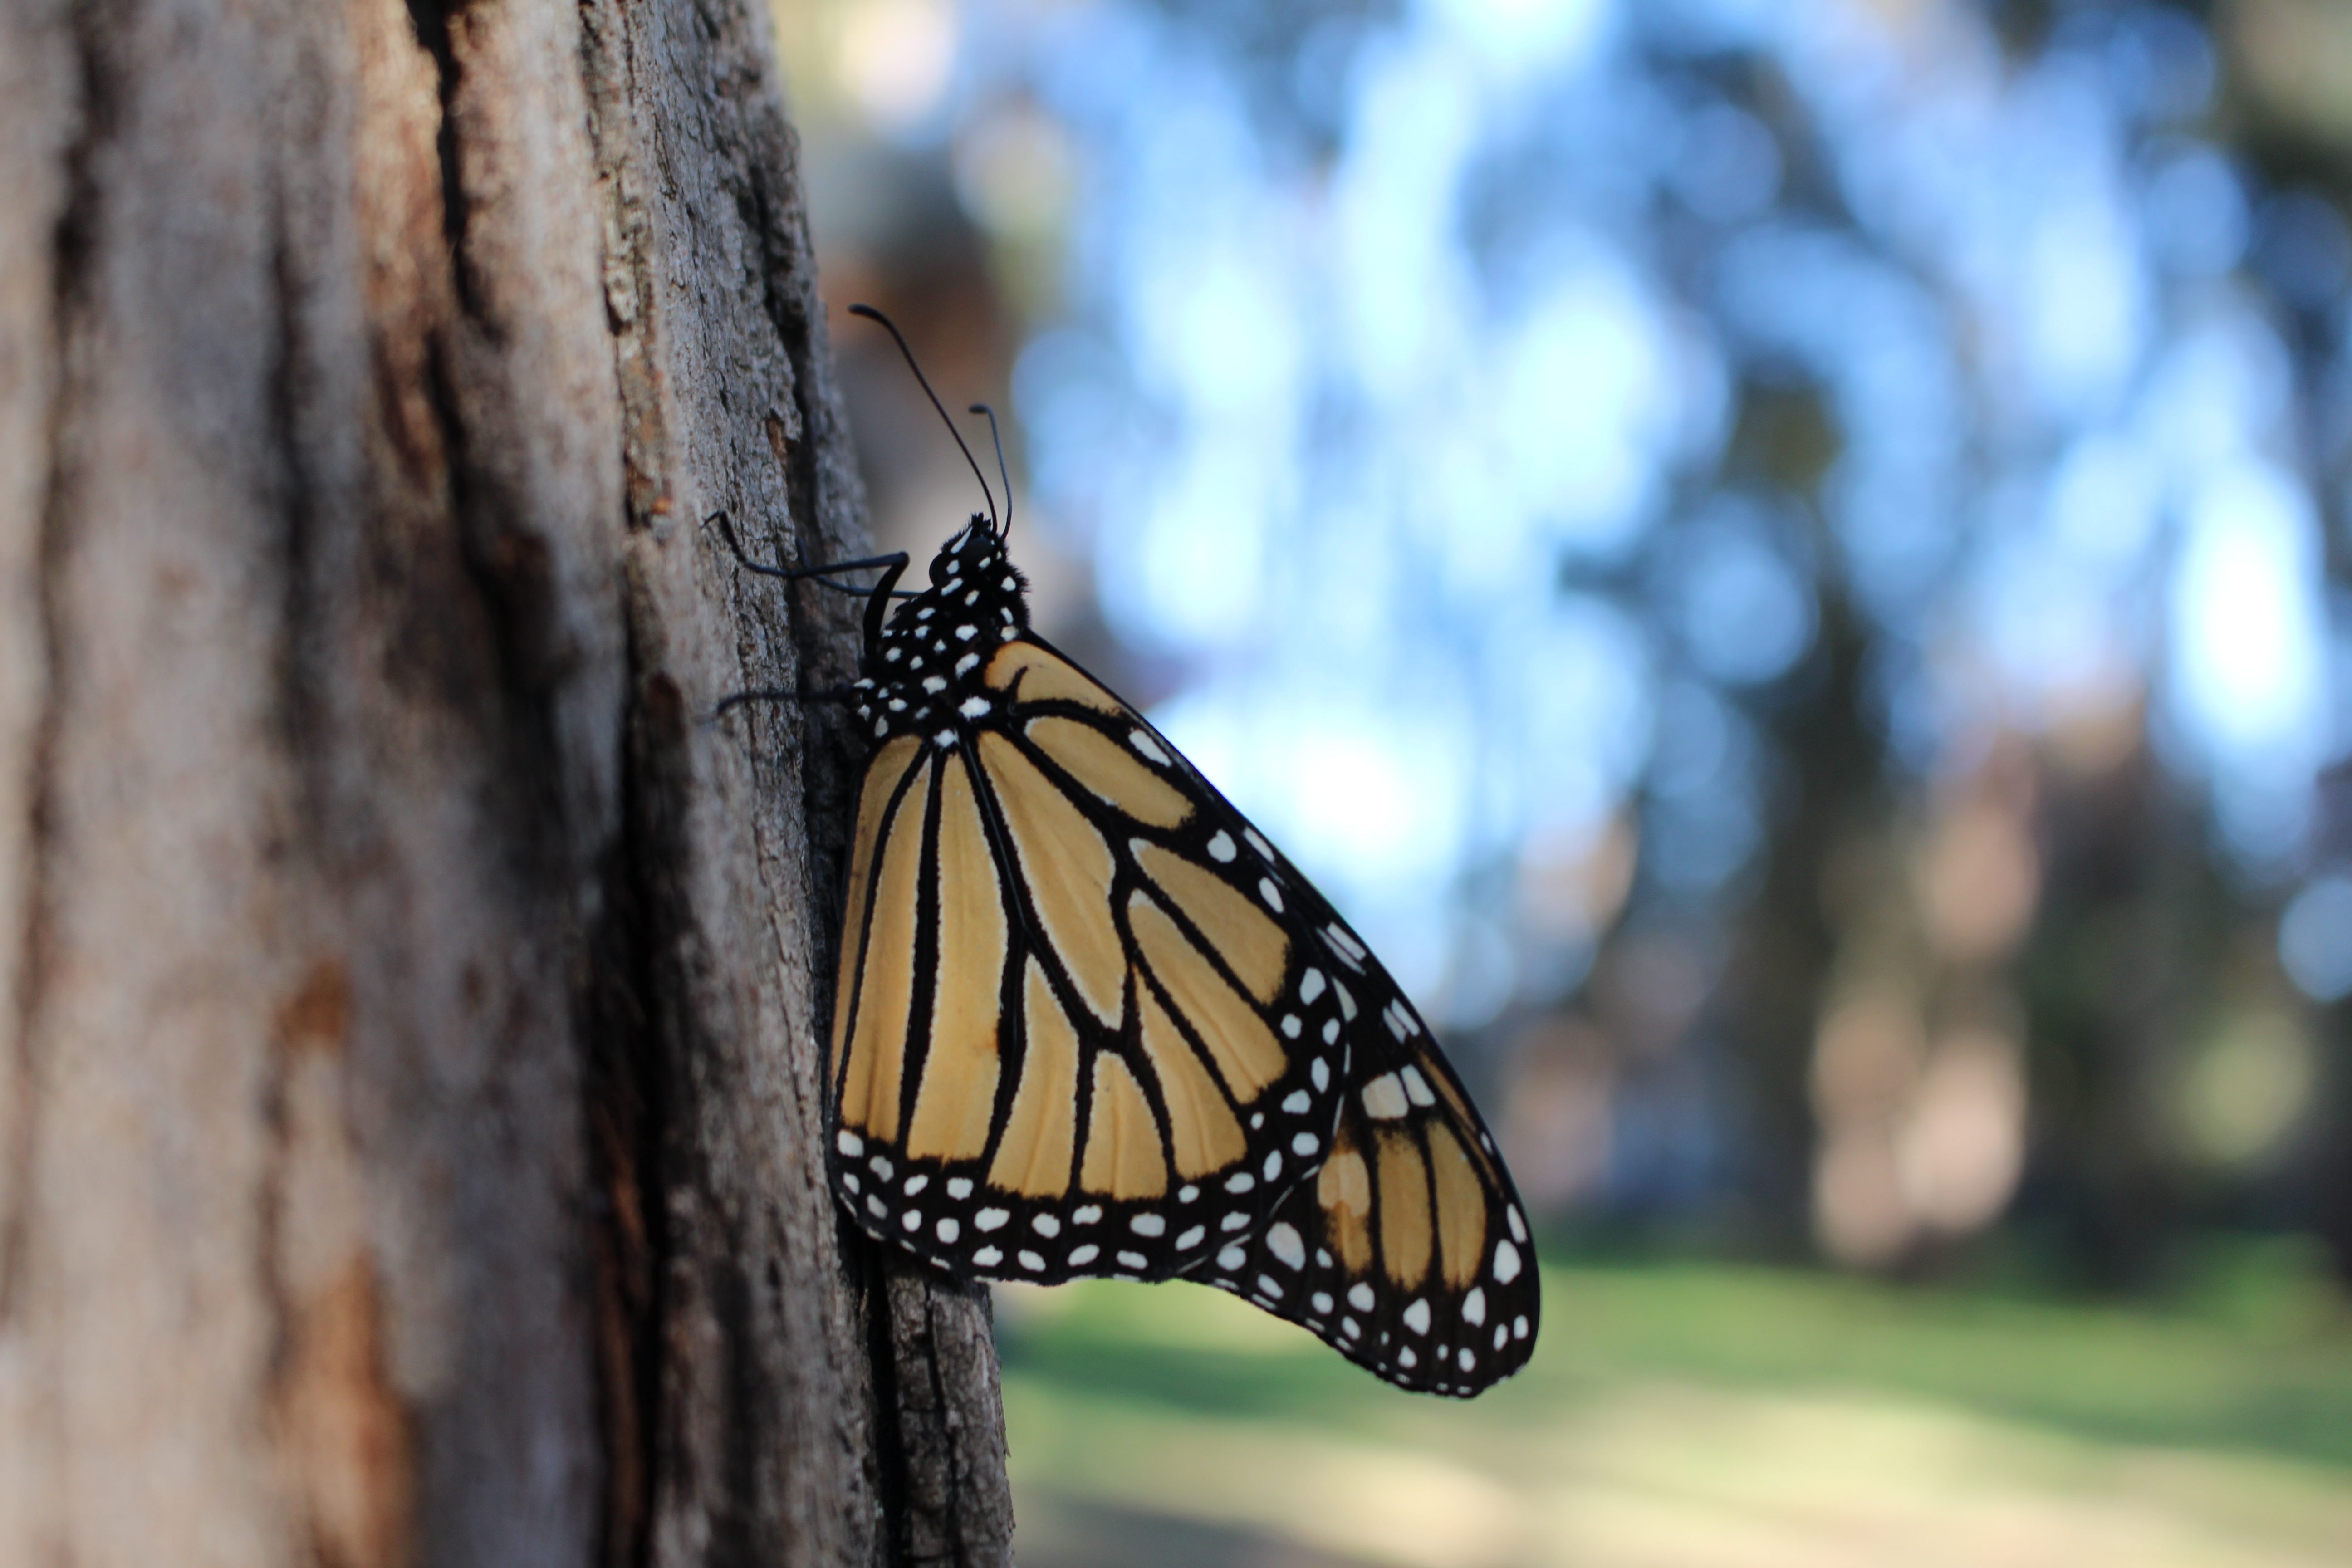 A solitary monarch perches on a tree trunk in this dimly-lit scene.